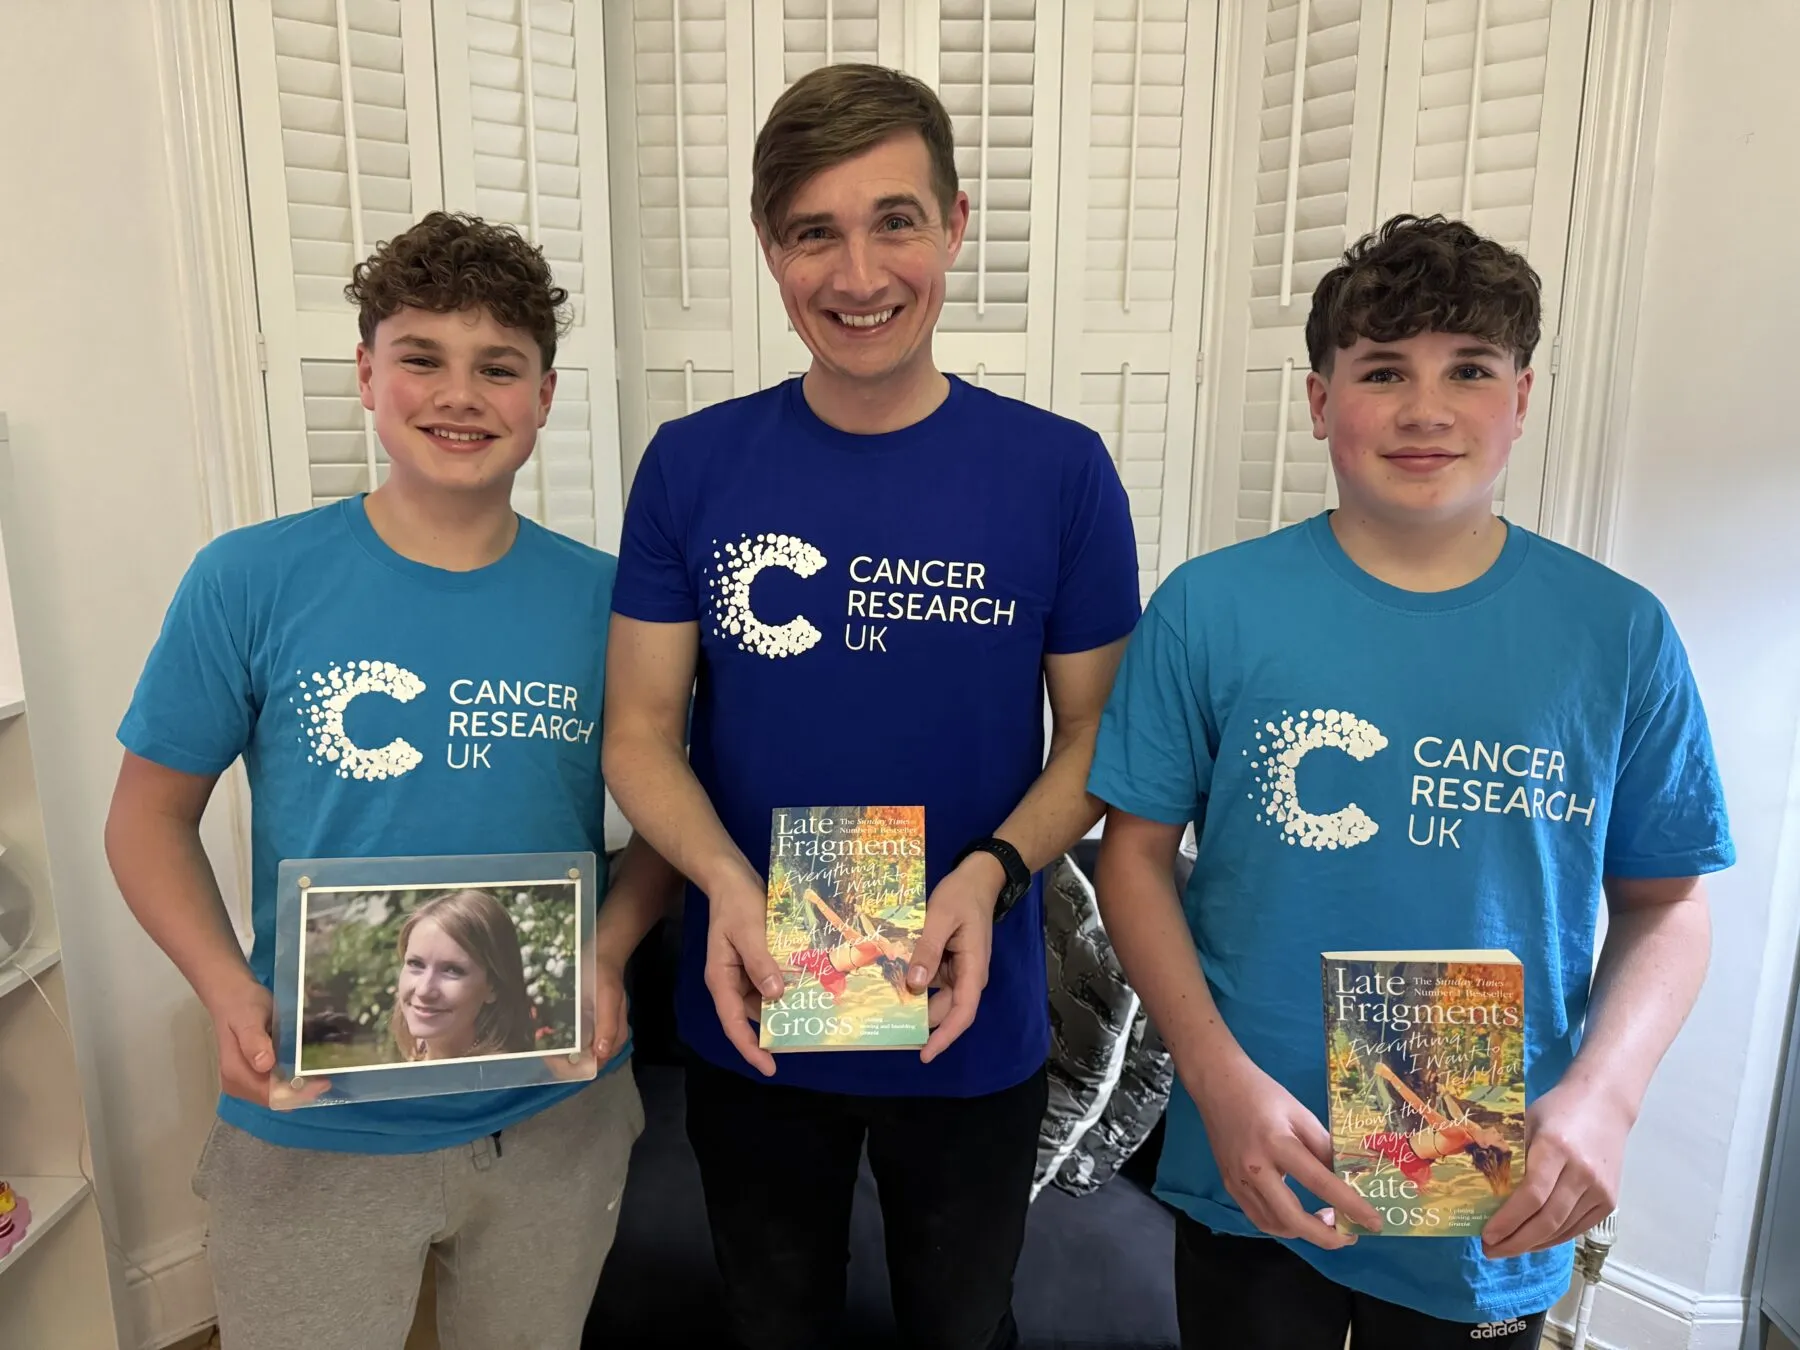 A picture of Billy with his twin sons wearing CRUK tshirts